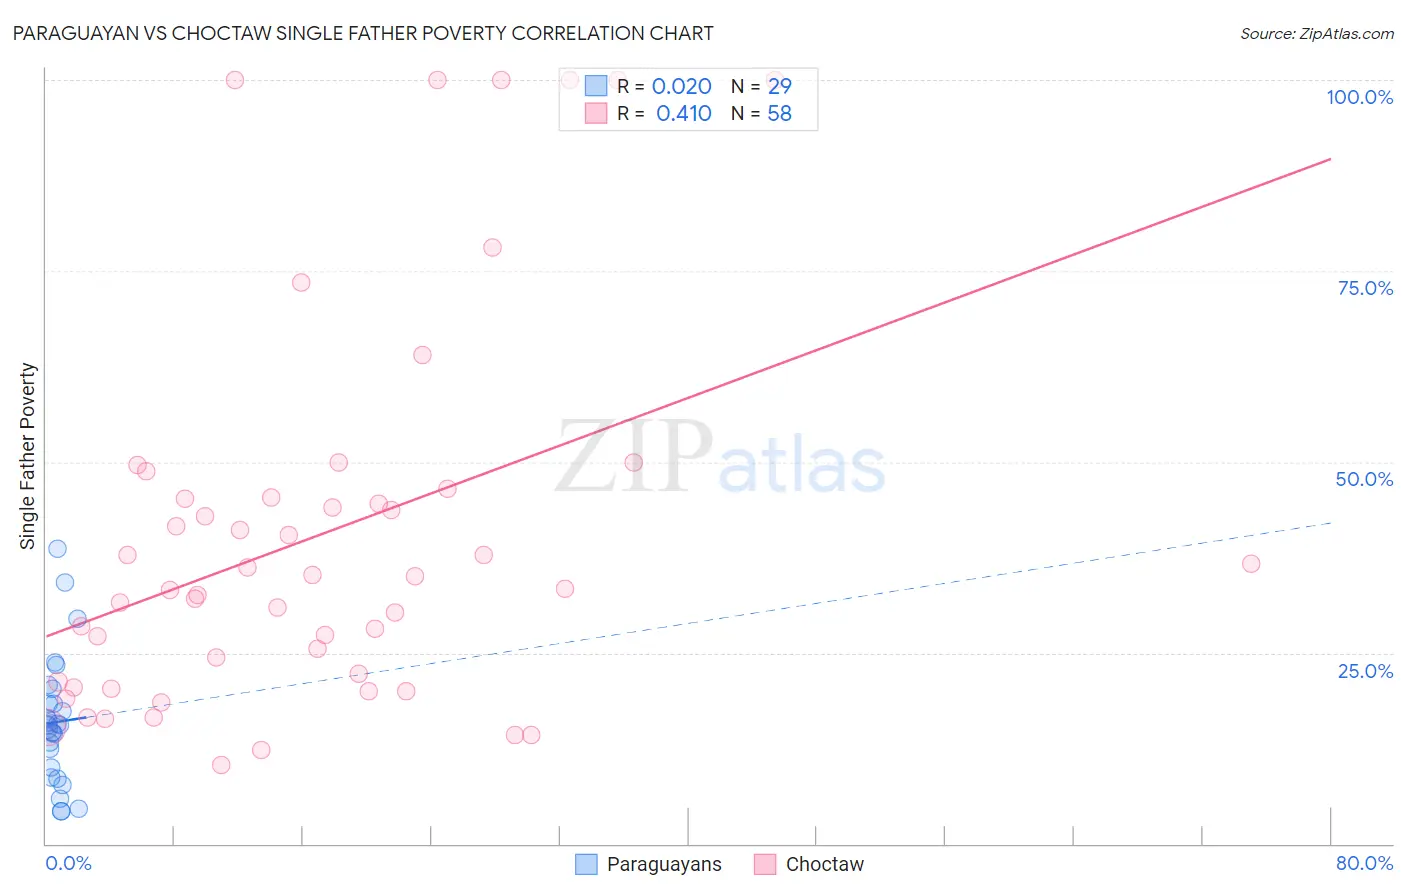 Paraguayan vs Choctaw Single Father Poverty